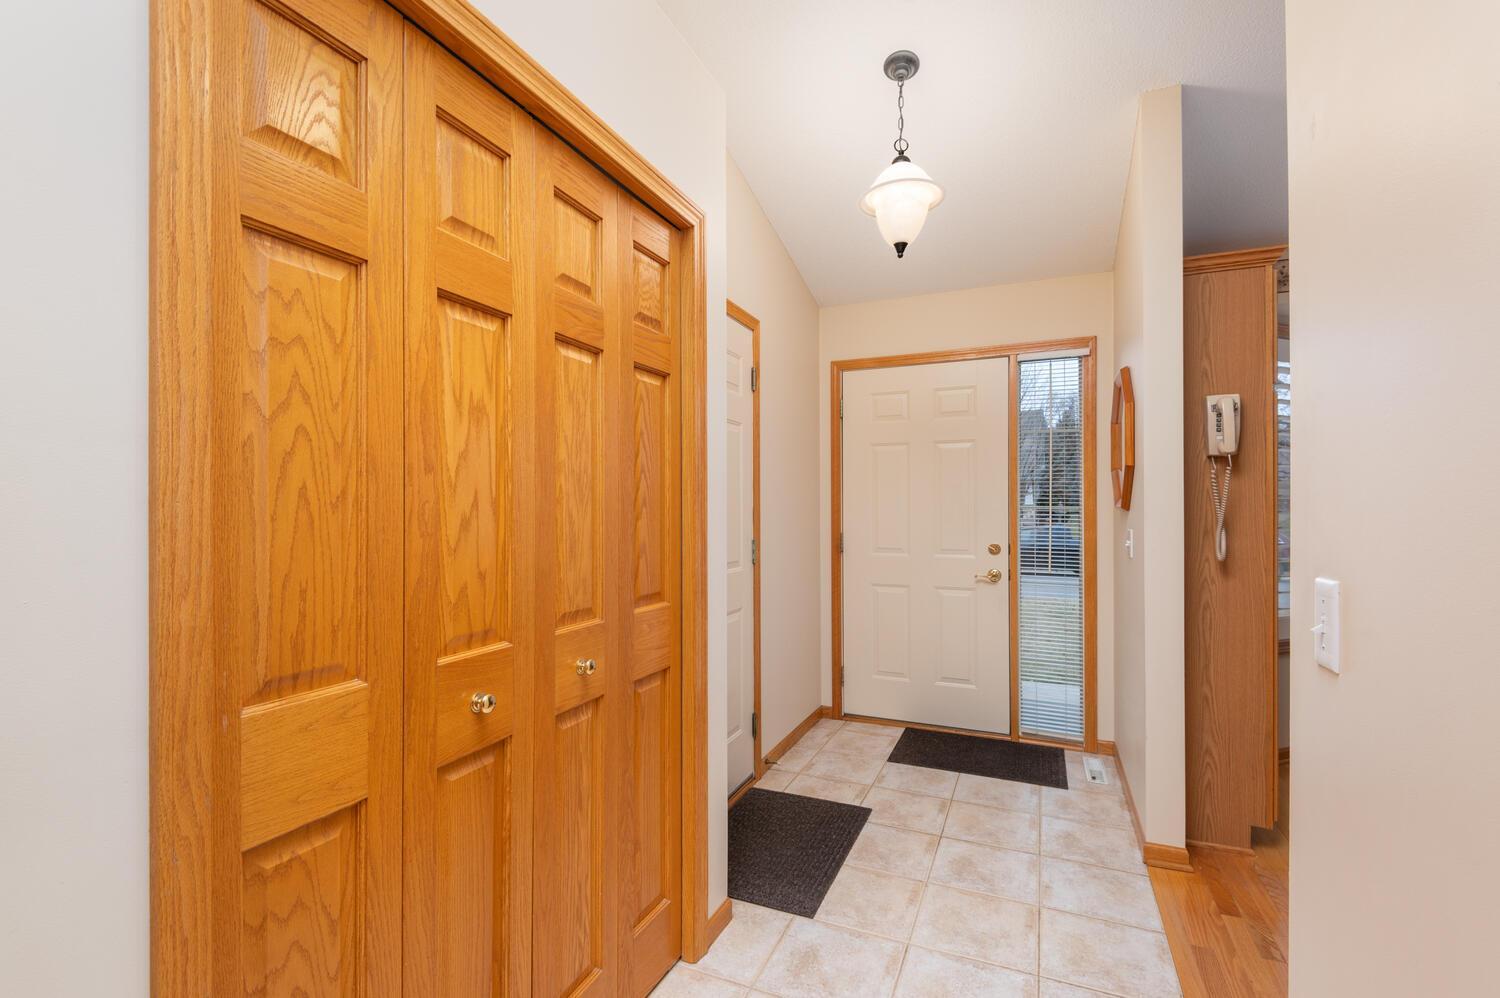 The ceramic tile entryway has plenty of room to greet guests. There is a full size coat closet and a door steps out to the garage.